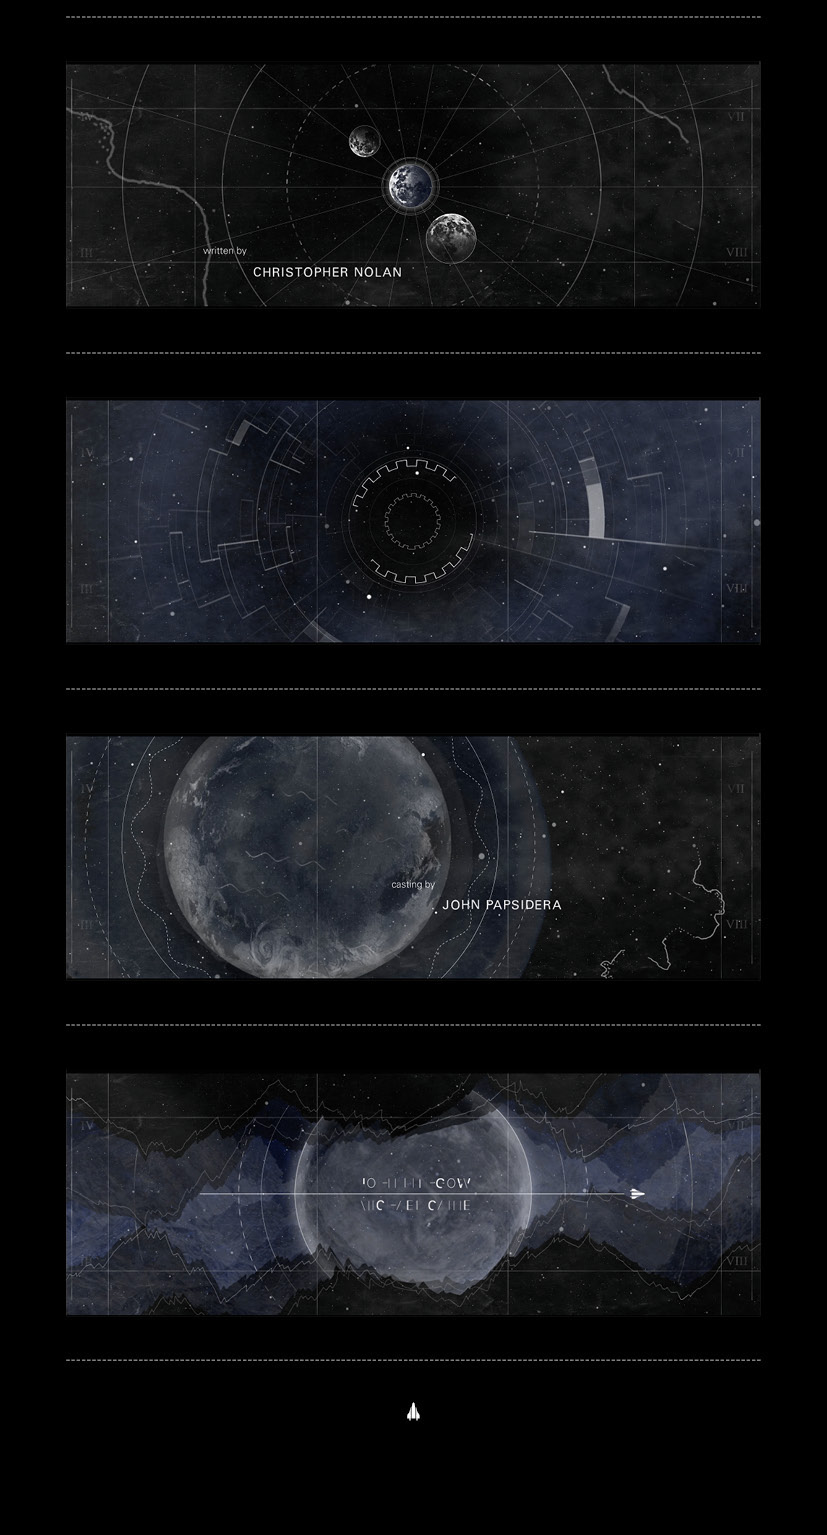 bachelor2015 HTW motiondesign Sciencefiction Scifi interstellar Space  universe geoemtrical Forms Planets